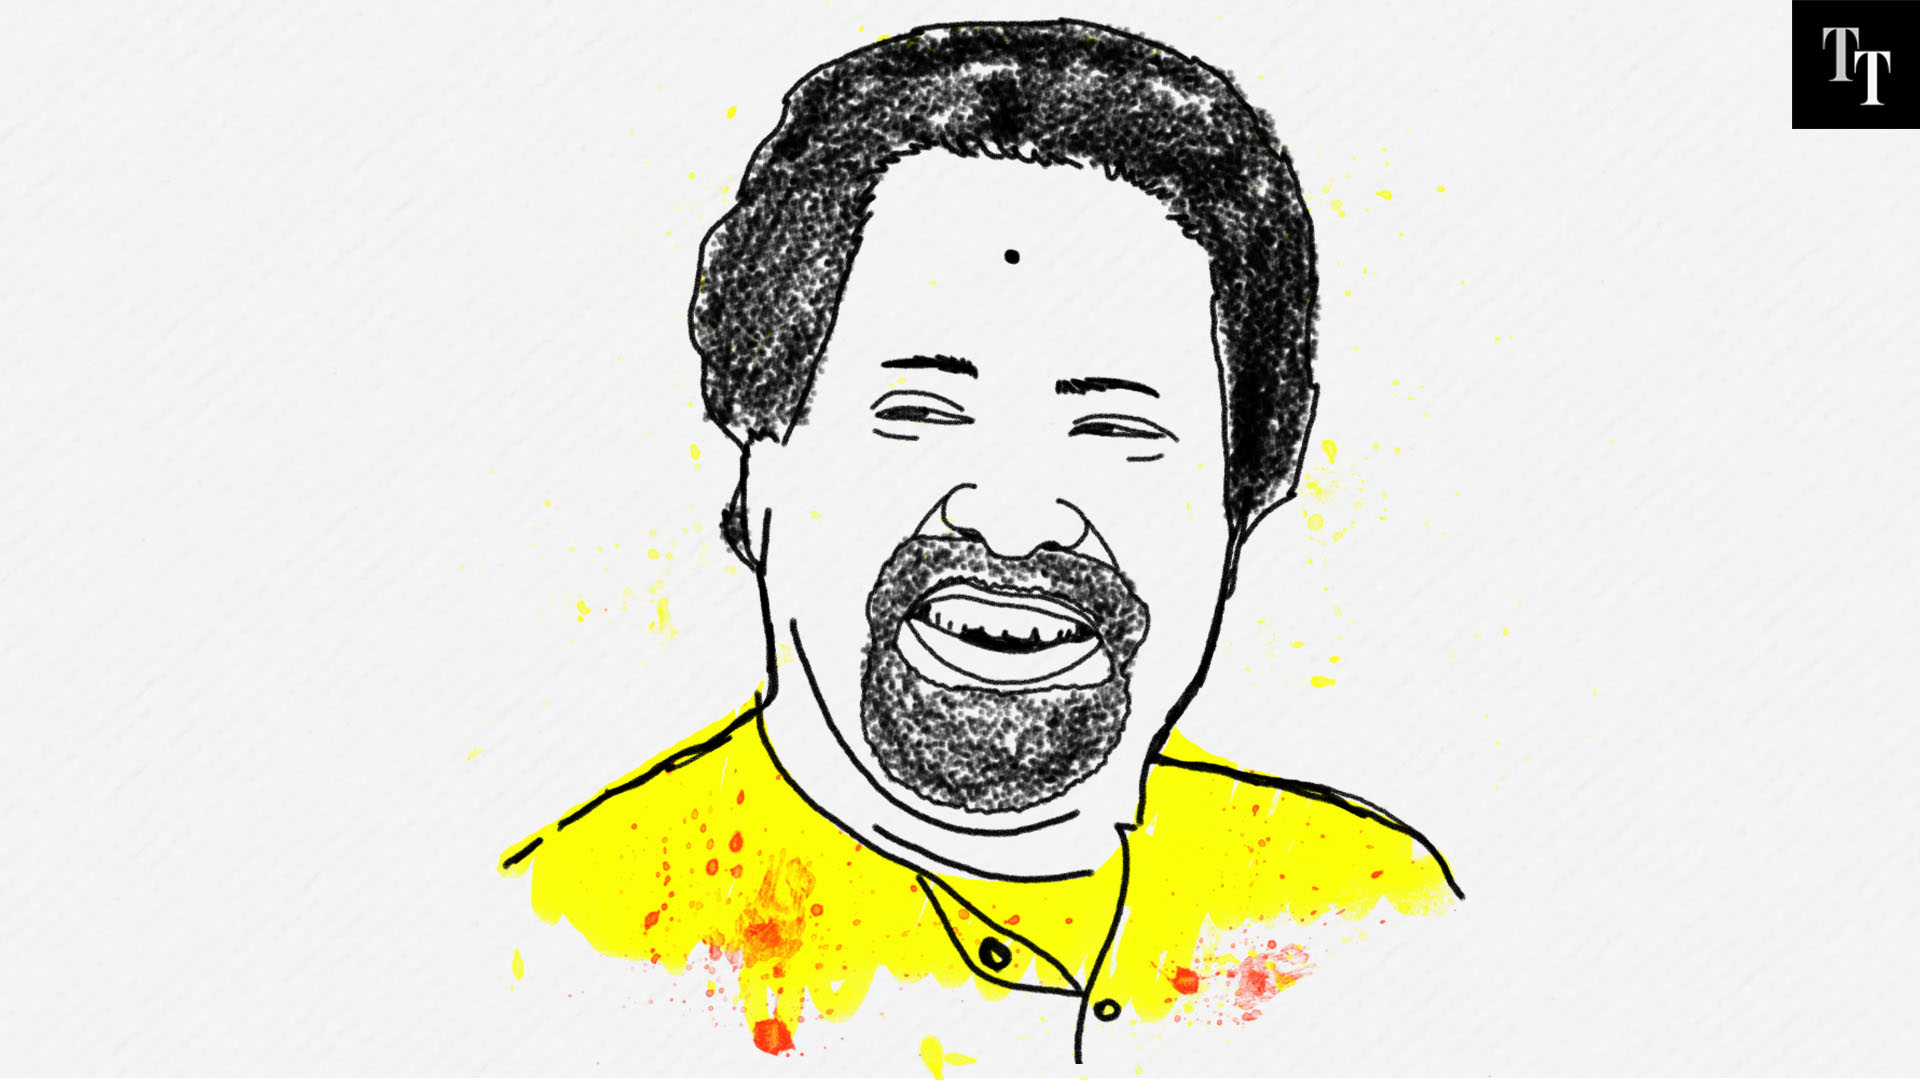  Sudip Bandyopadhyay has won the Calcutta north seat in 2009 and 2014